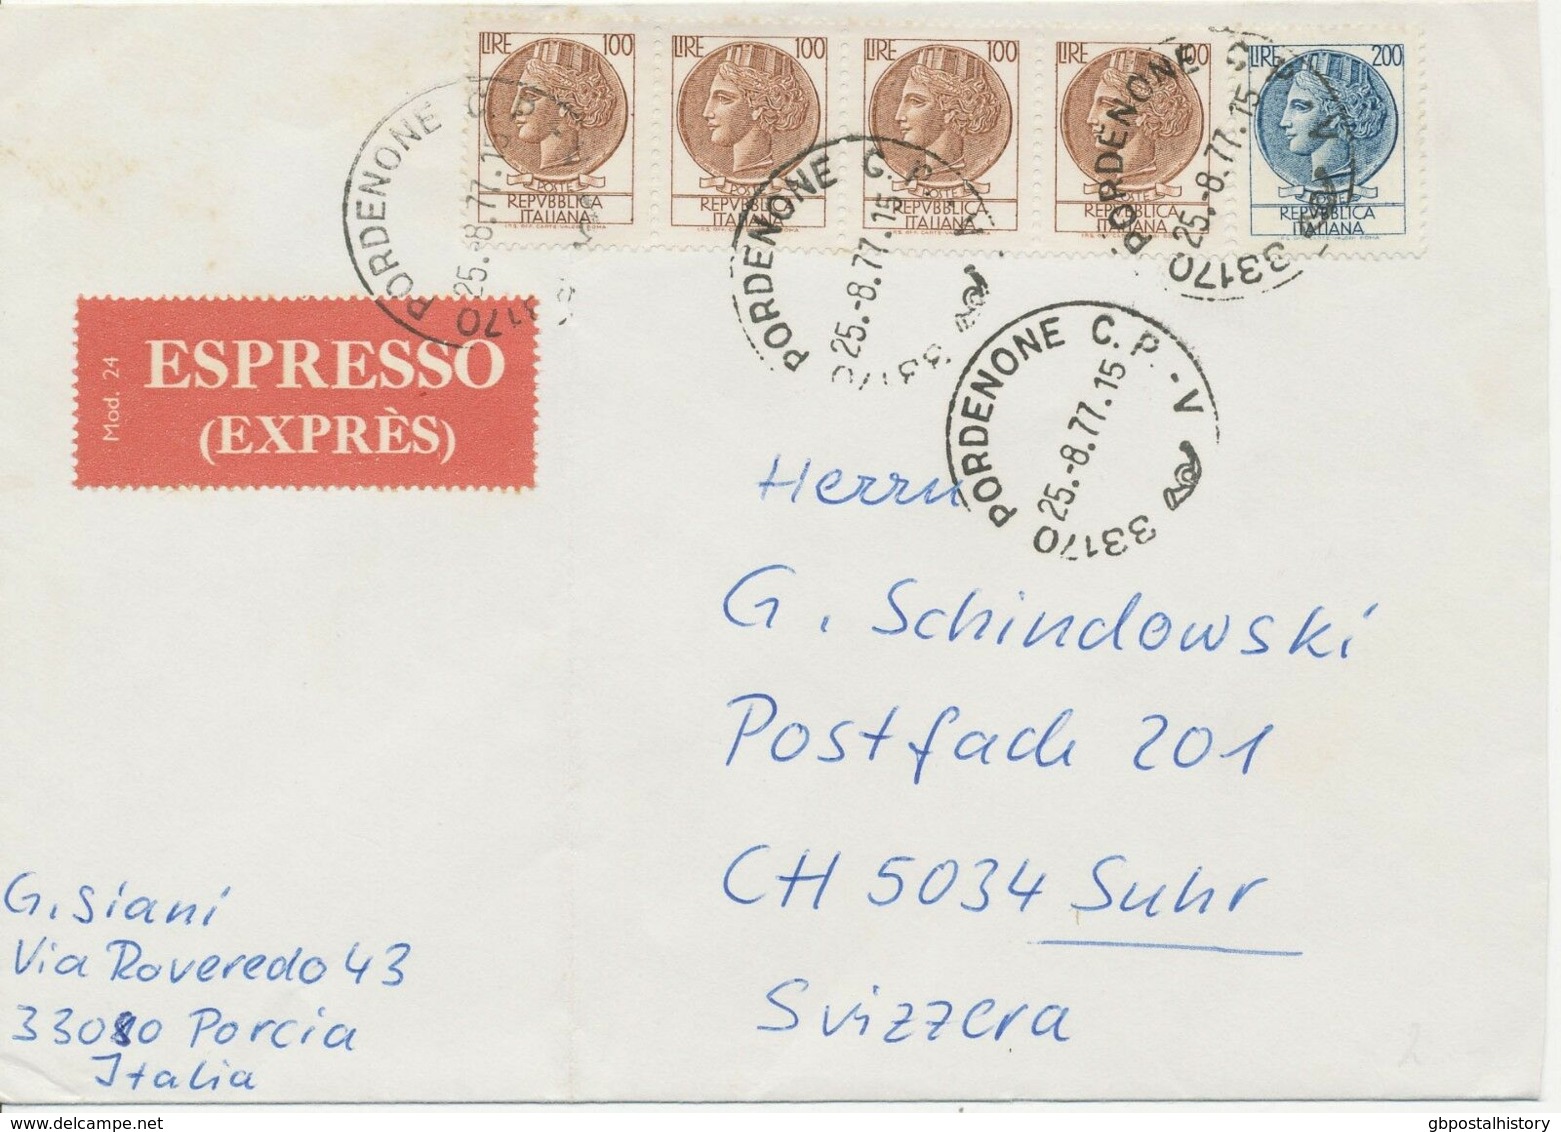 ITALY 1957/77 7 Different Superb ESPRESSO-covers (Express Covers) All Foreign - Poste Exprèsse/pneumatique